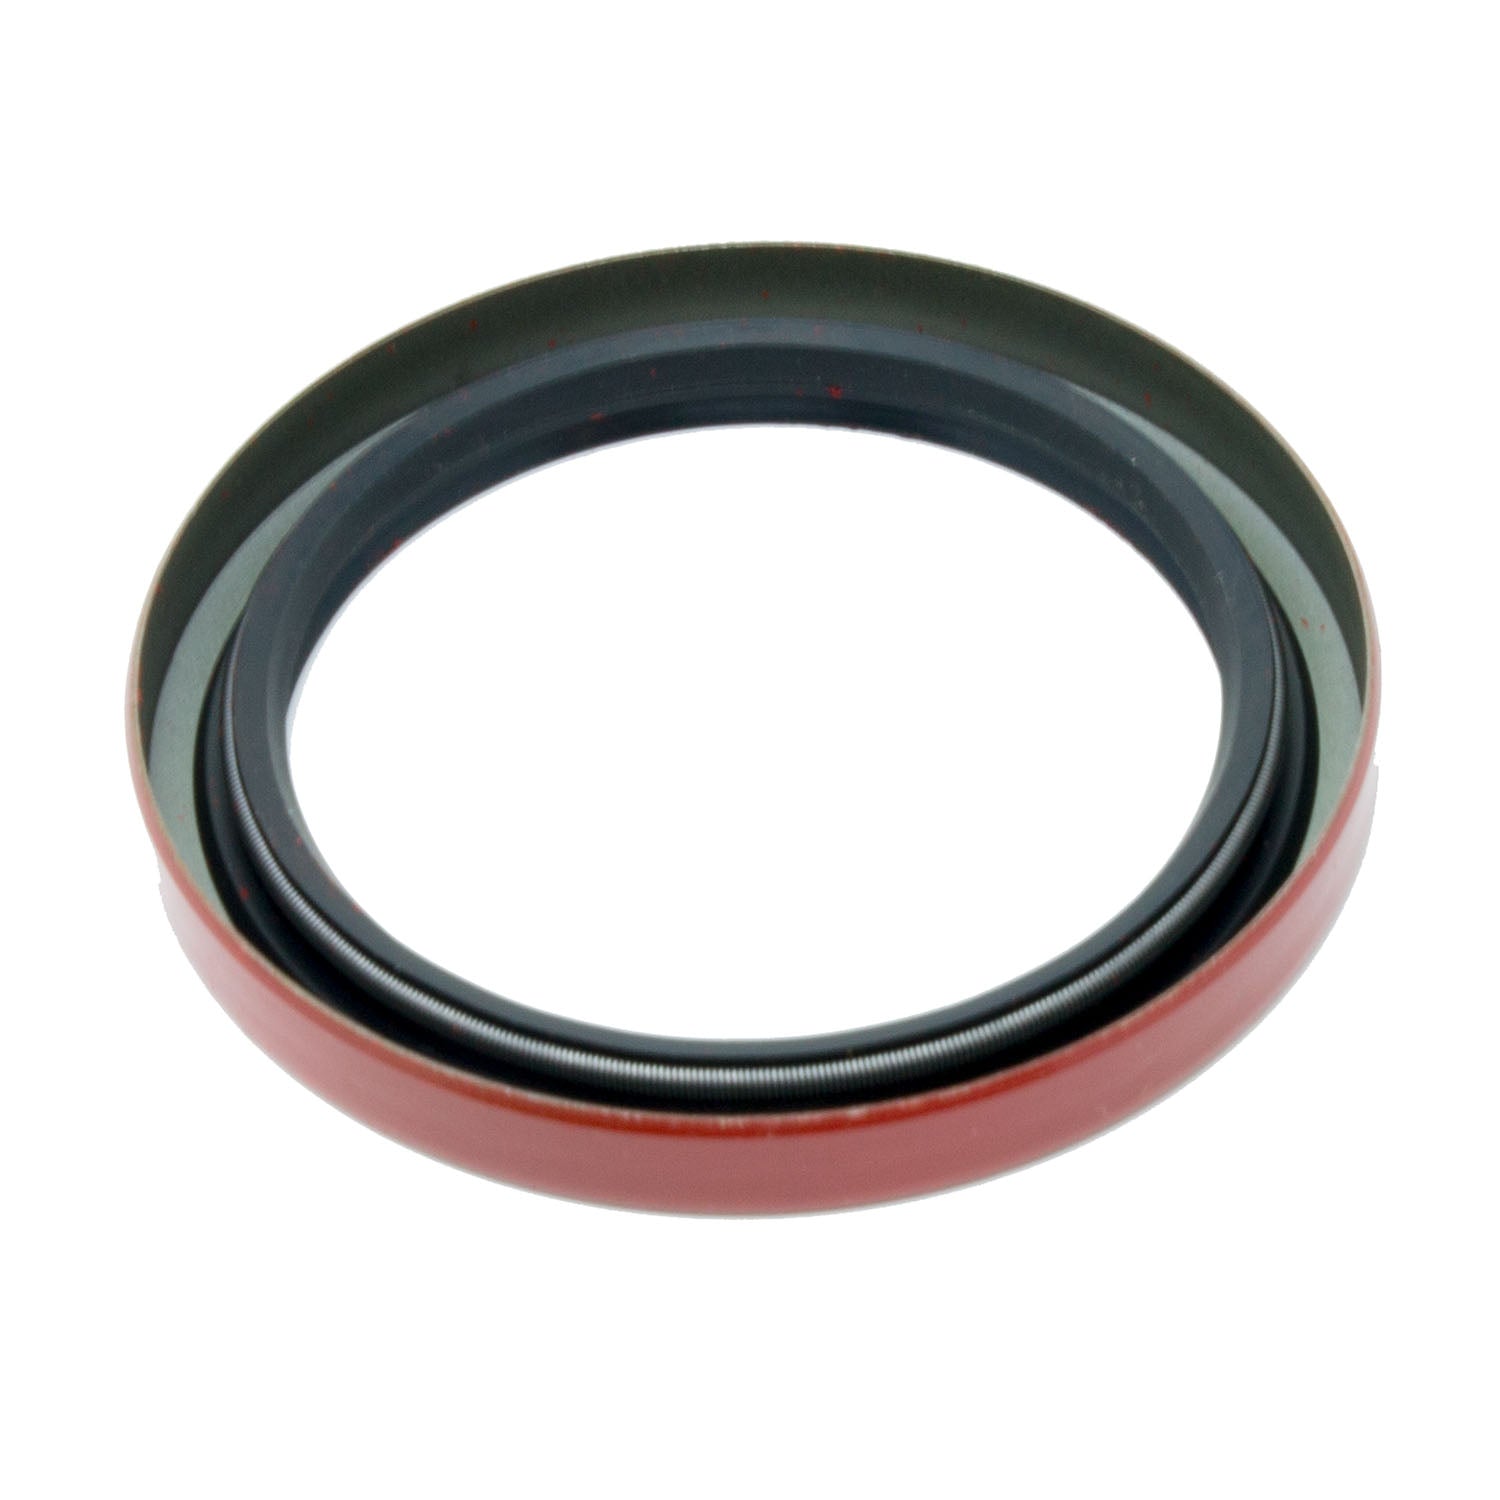 Duraforce 6658228, Axle Oil Seal For Bobcat